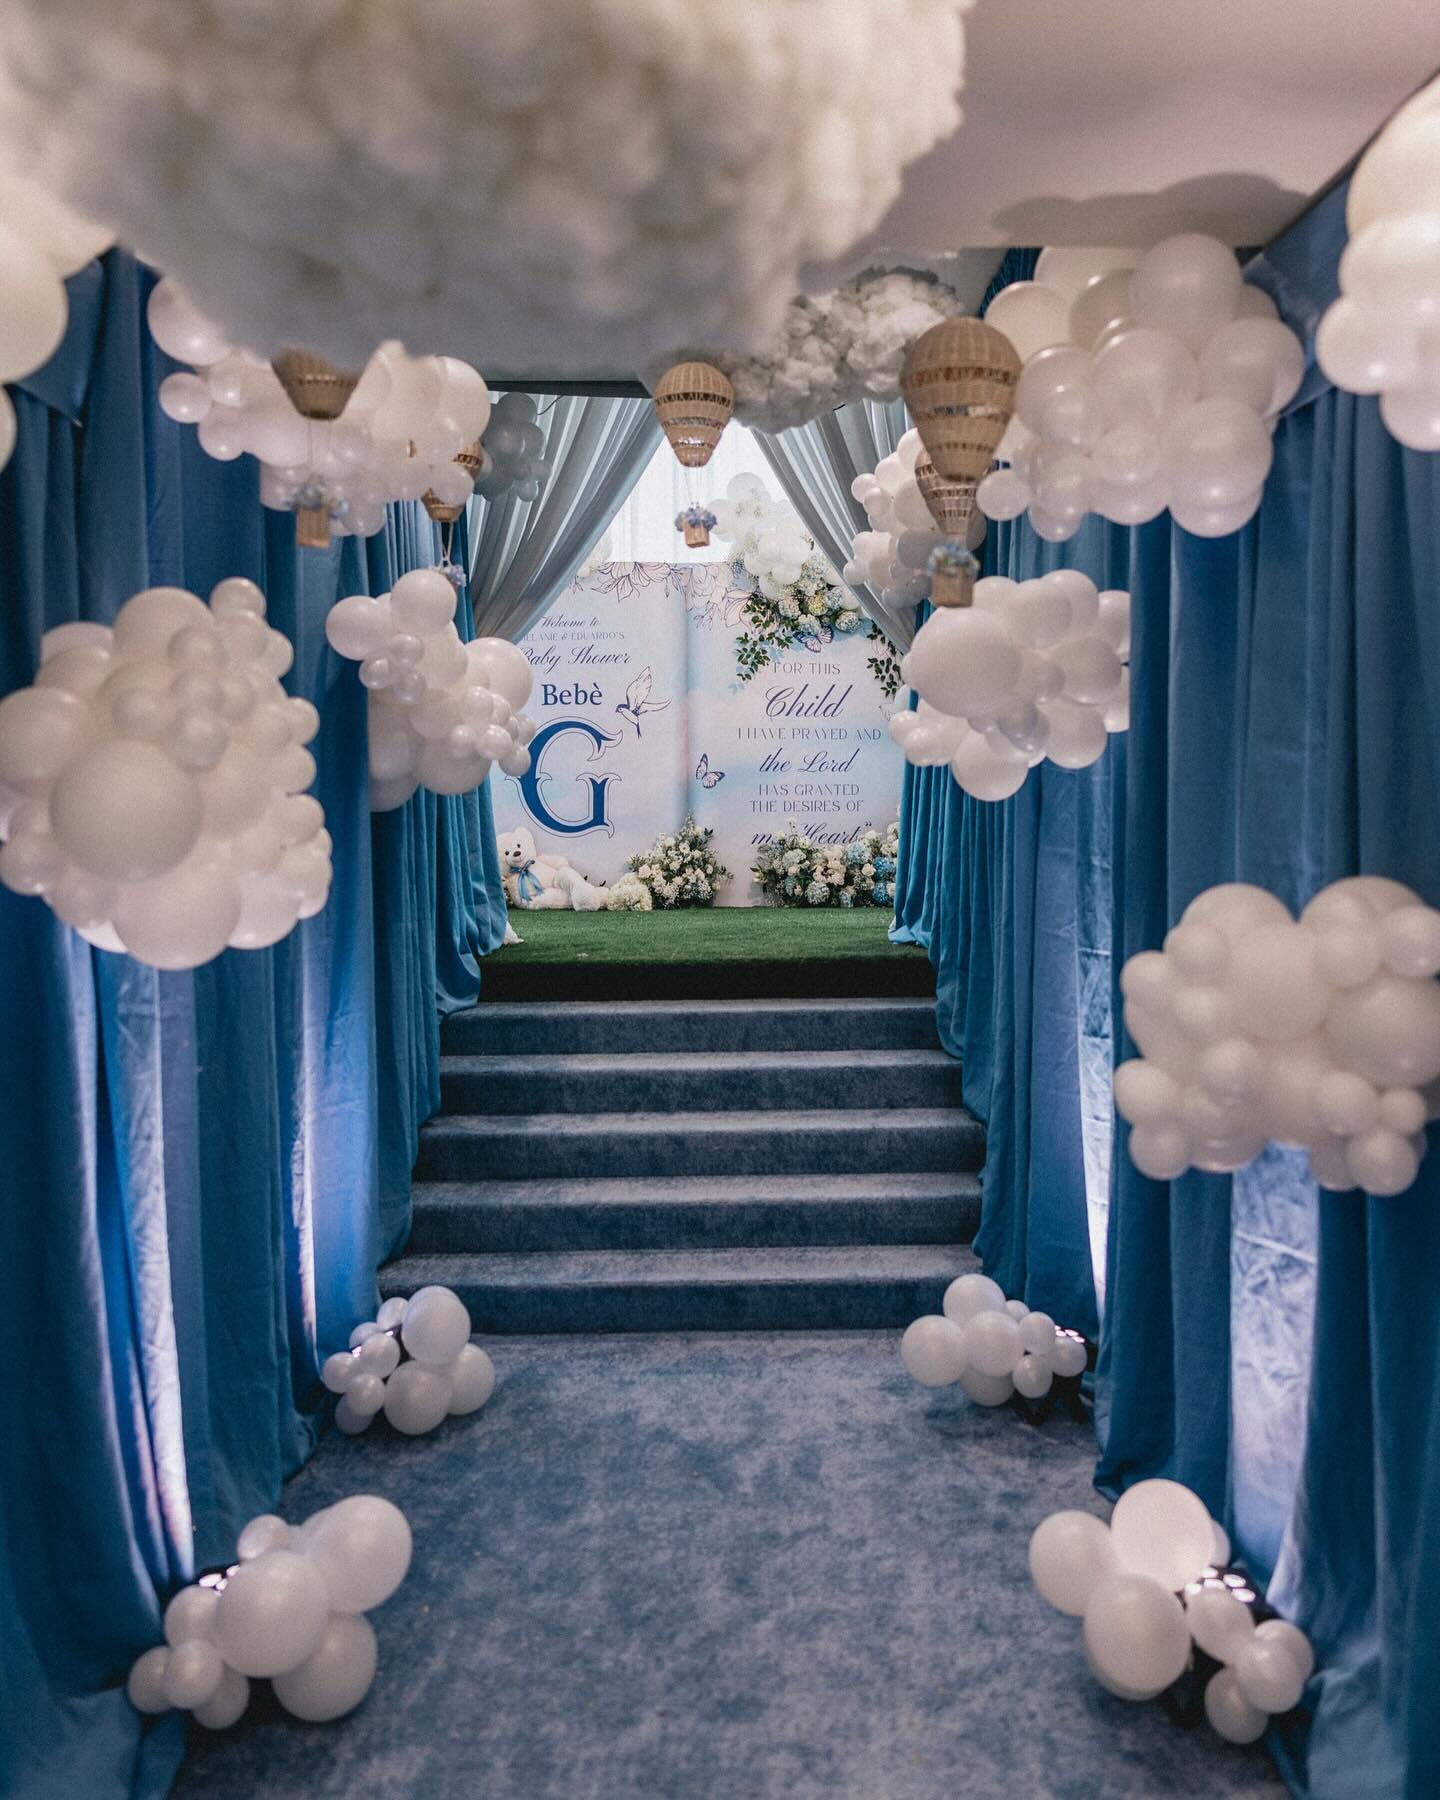 Up in the clouds for this elevated and airy baby shower. 
Lighting|Draping #ambereventproduction 
Planning|Design @tangedesign @glowconceptsevents 
Photography @johnandjoseph 
Floral @eucharis.studio 
Rentals @revelryeventdesign @mtb_event_rentals 
F